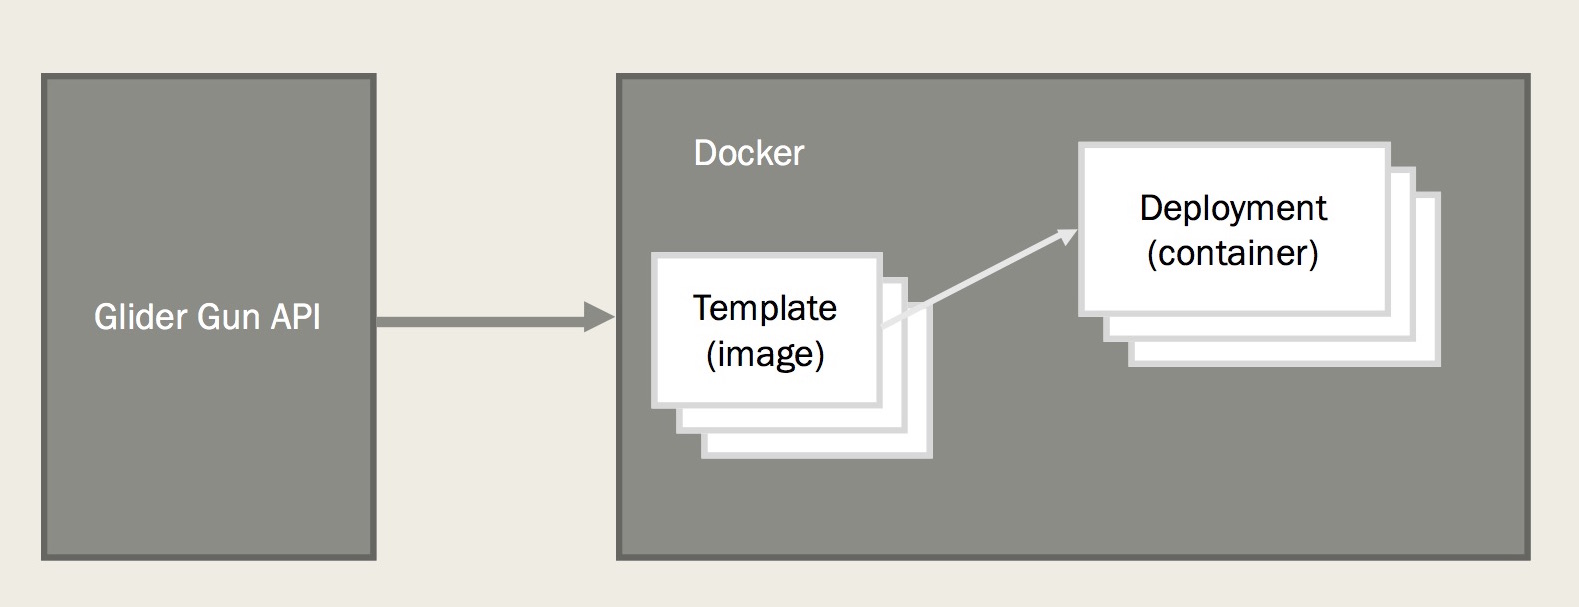 templates as docker images